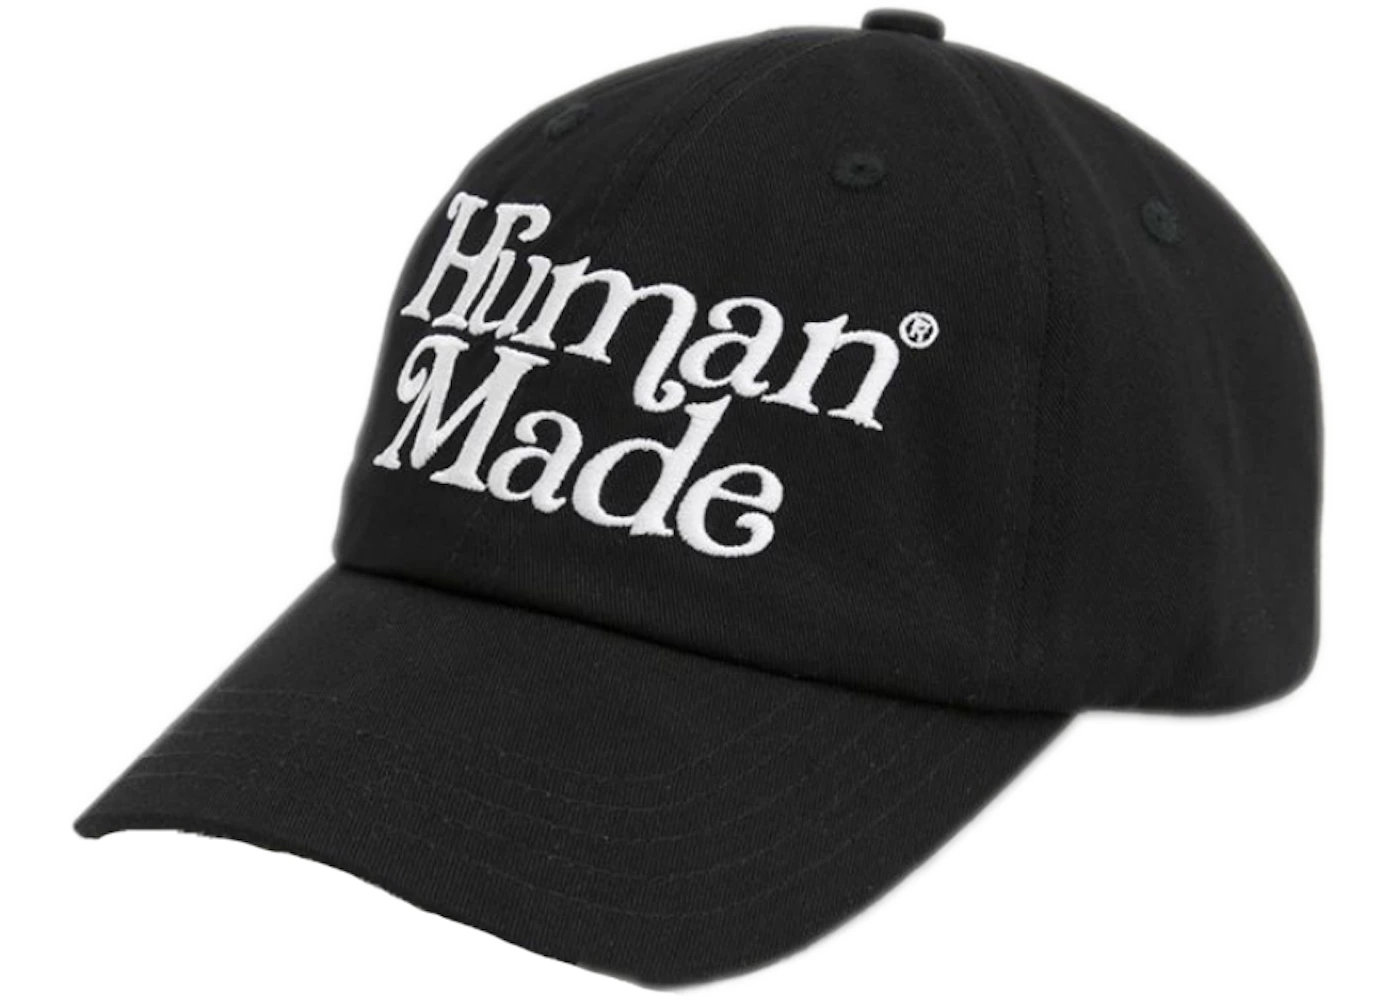 Human Made x Girls Don't Cry Hat Black